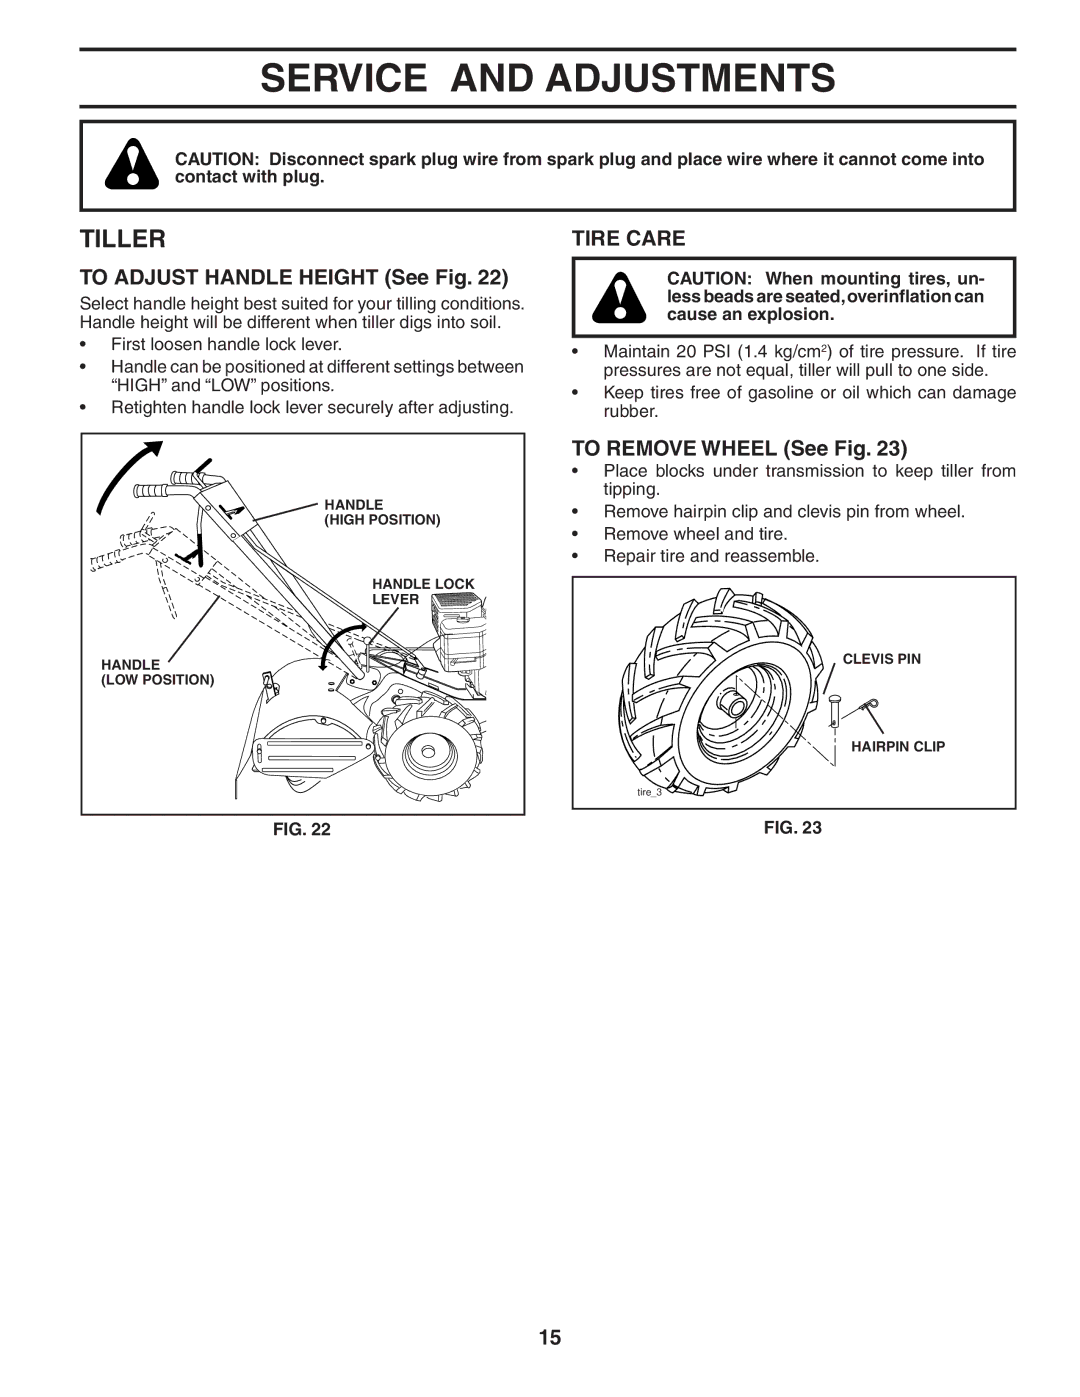 Maxim MXR500 Service and Adjustments, Tiller, To Adjust Handle Height See Fig, Tire Care, To Remove Wheel See Fig 